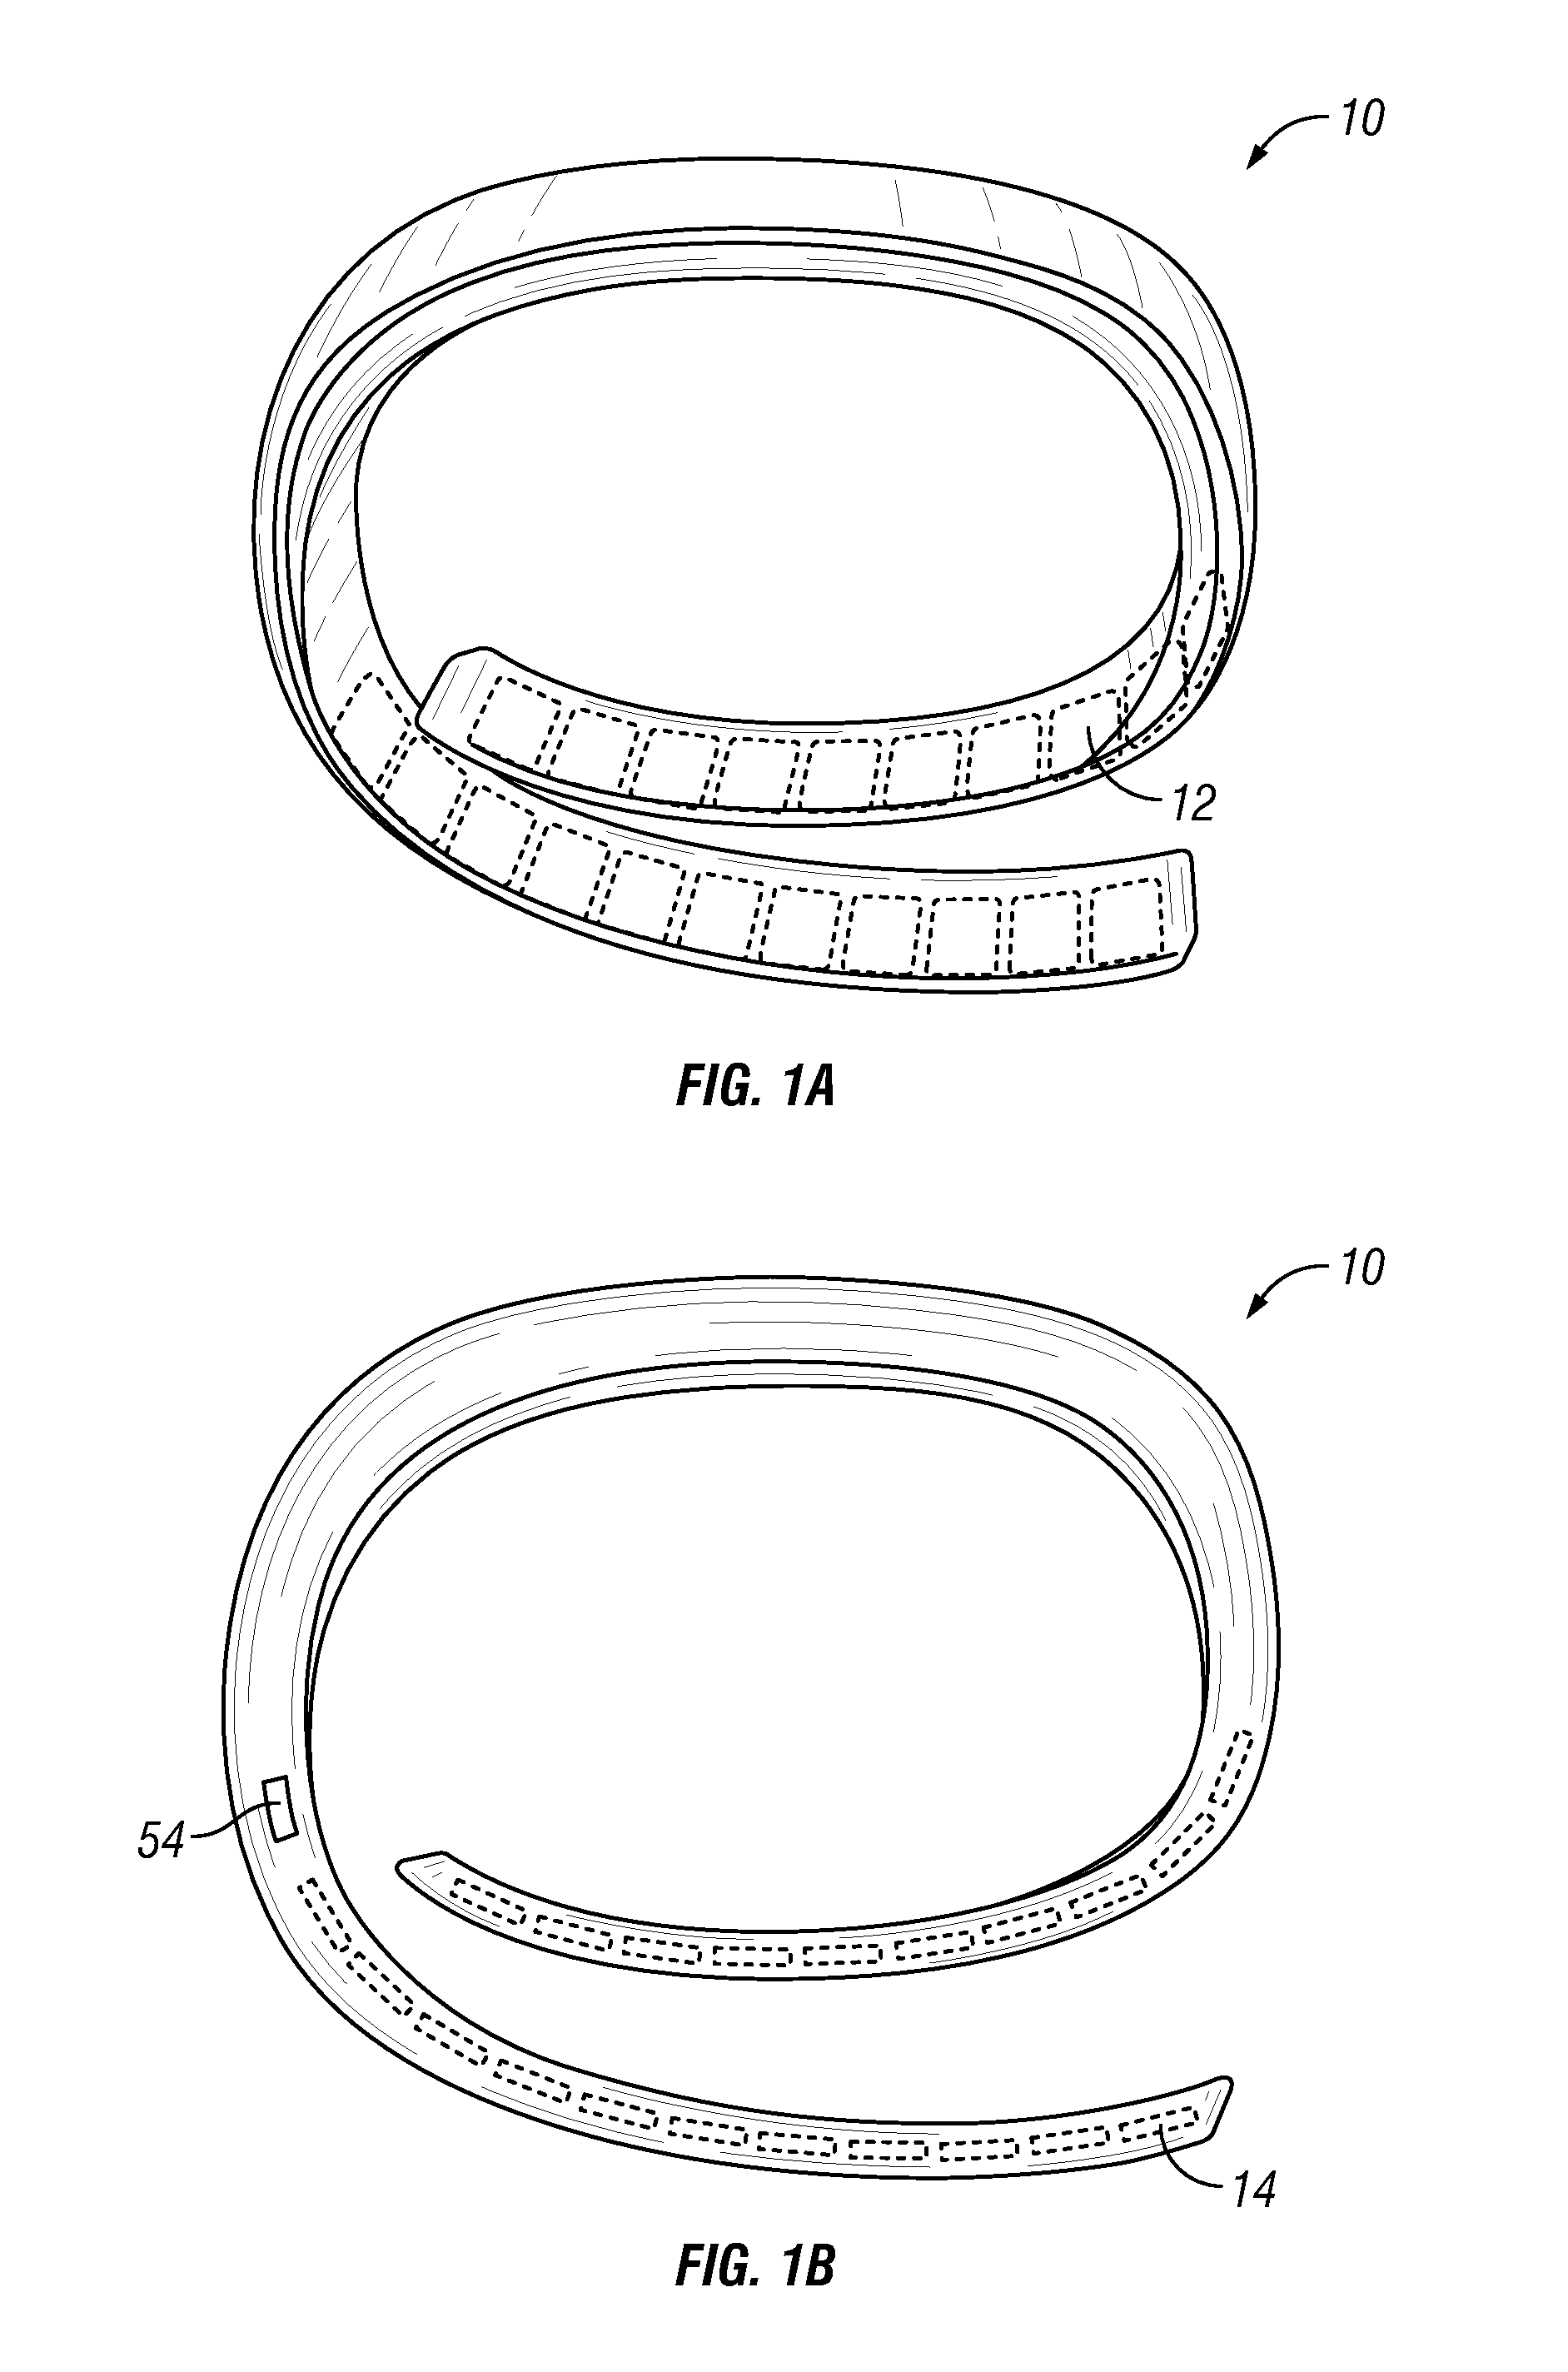 Methods using patient monitoring devices with unique patient IDs and a telemetry system